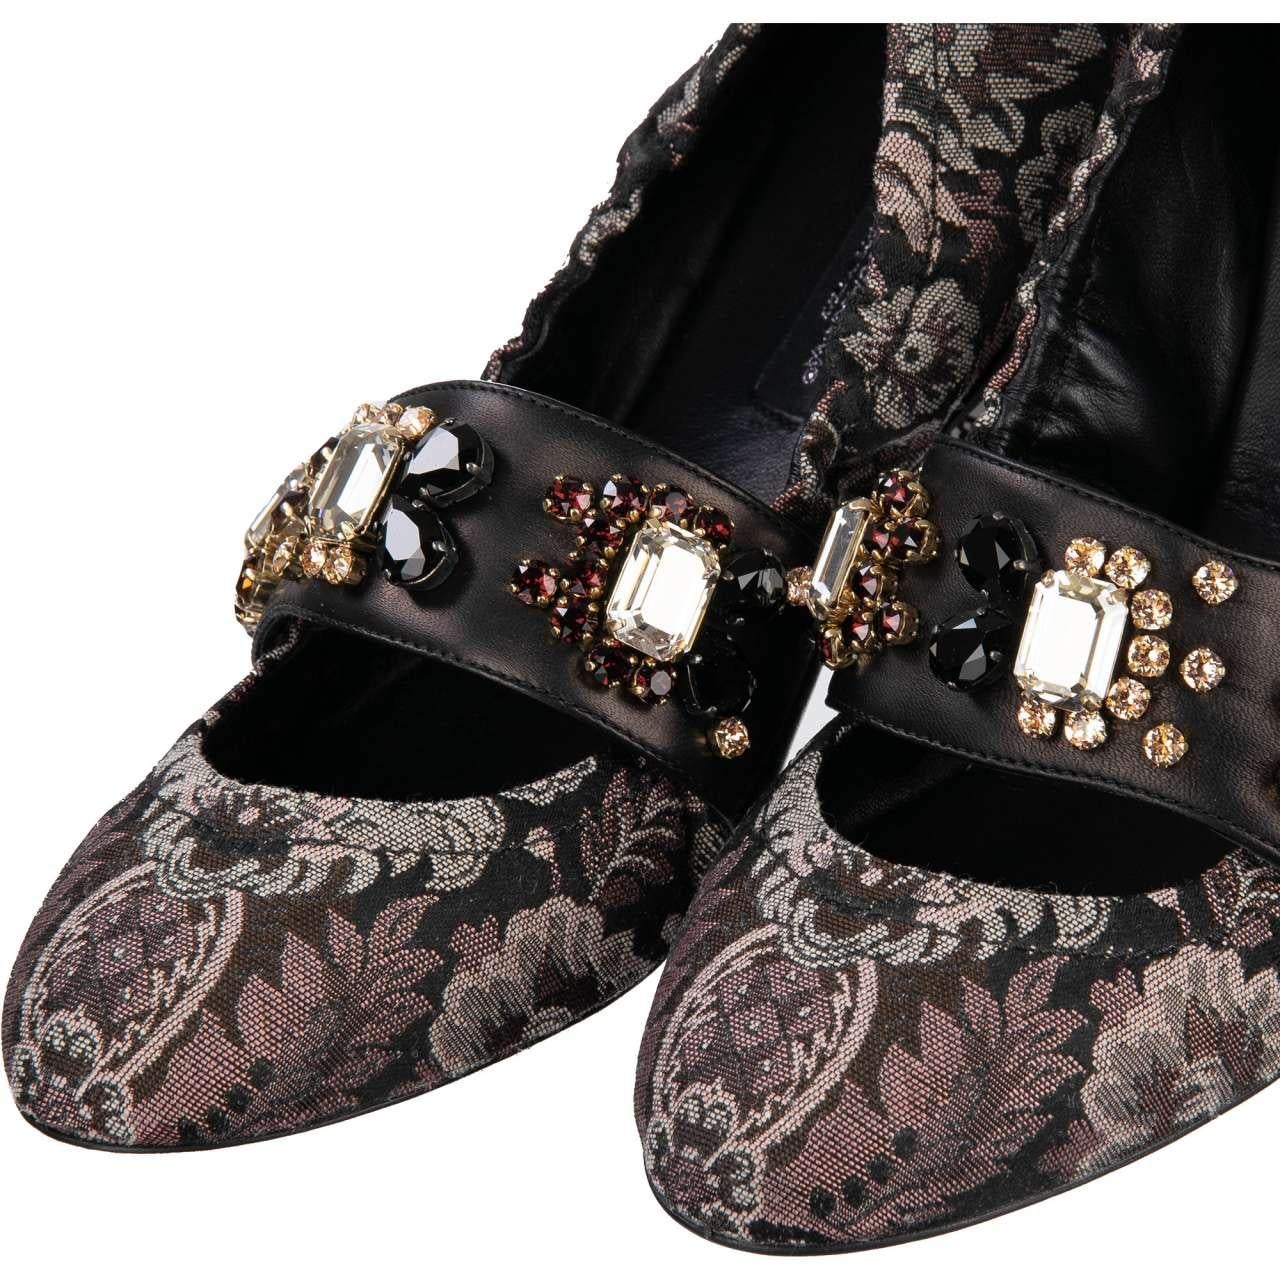 Dolce & Gabbana - Brocade Ballet Flats VALLY with Crystals 38.5 In Excellent Condition For Sale In Erkrath, DE